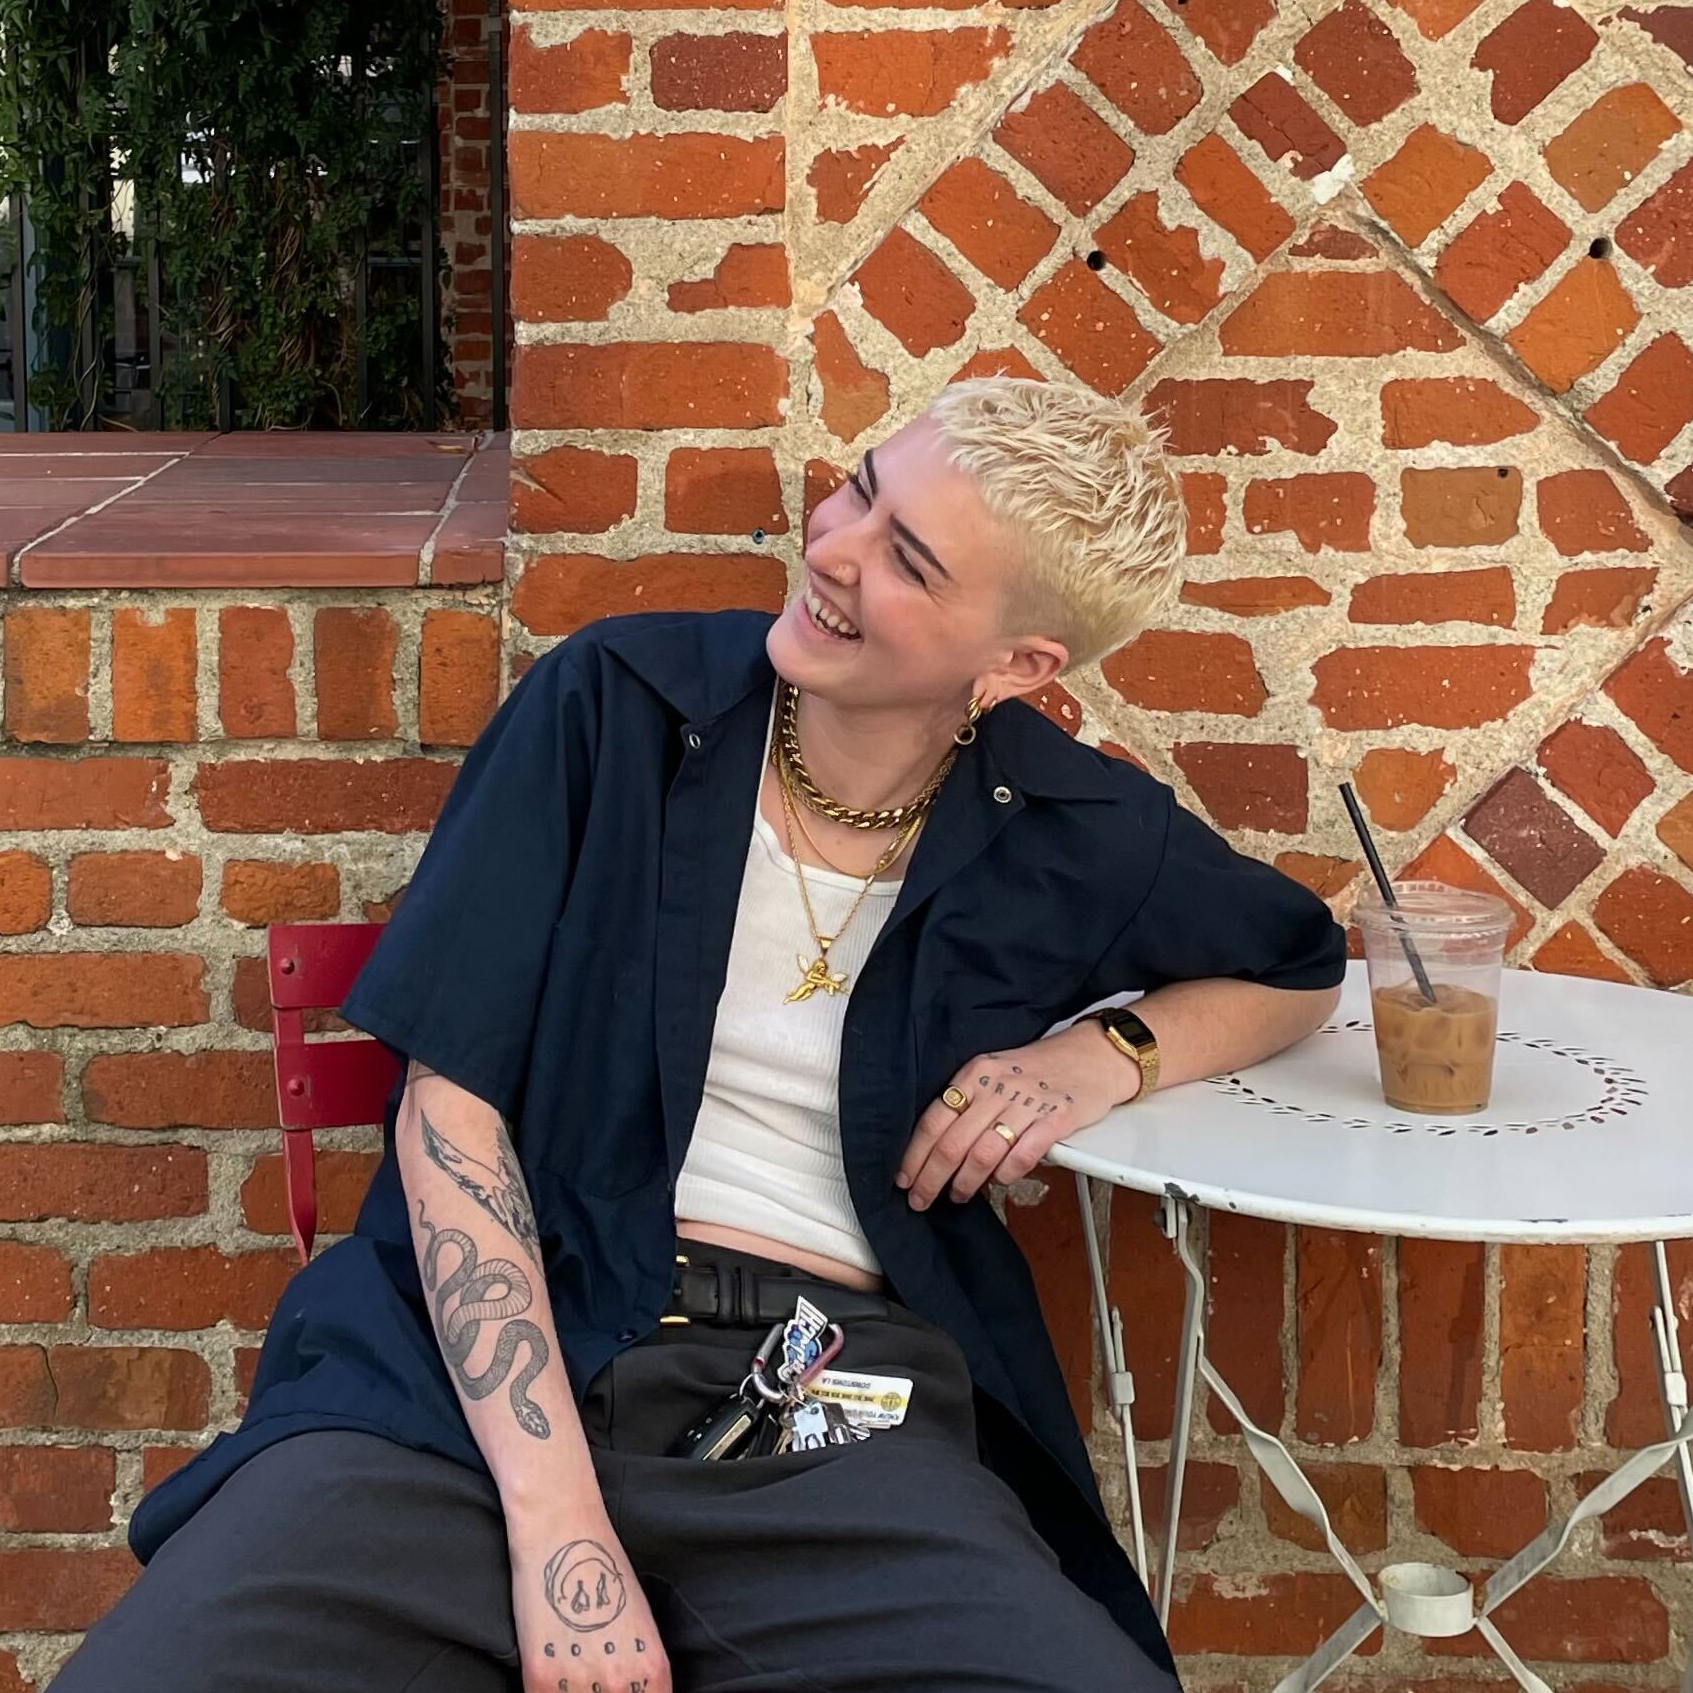 photo of Rio Romeo, a white butch nonbinary person, laughing in front of a coffee shop